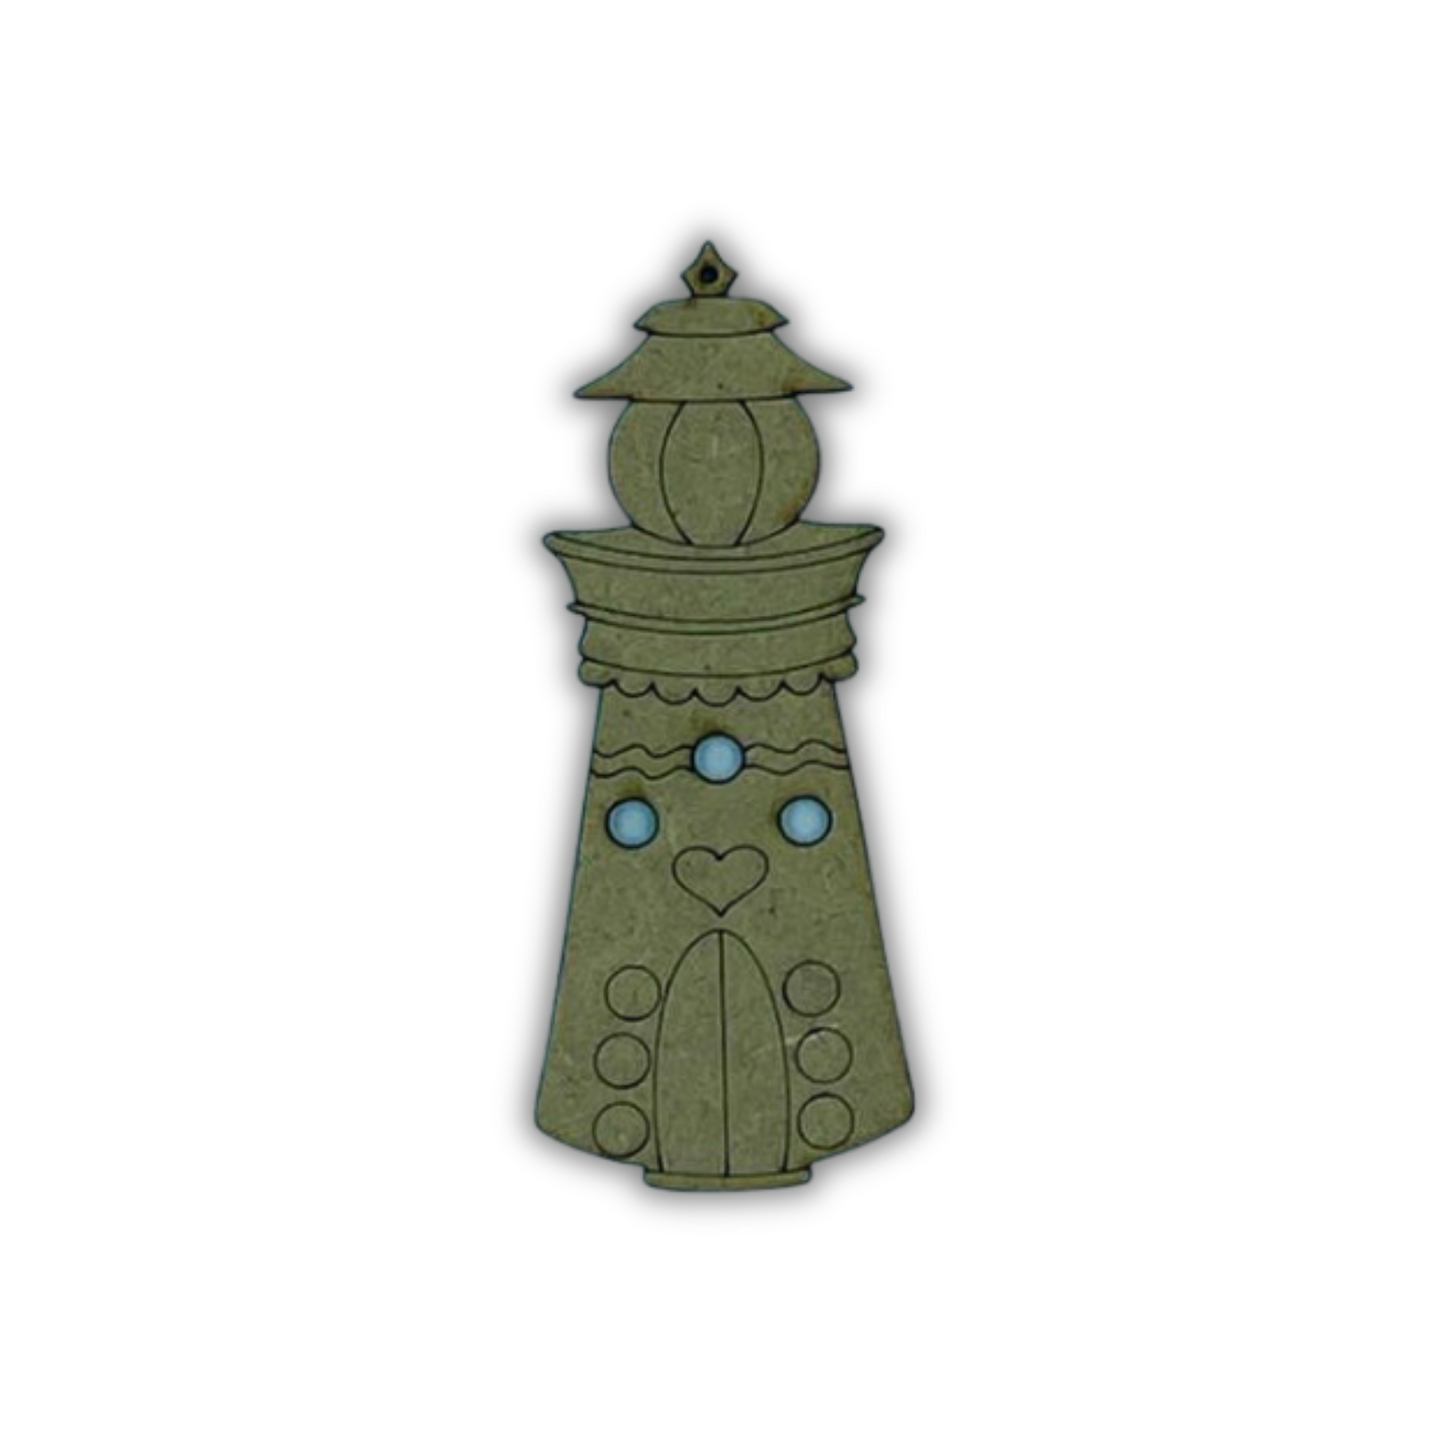 Gingerbread lighthouse ornament Out of the Wood